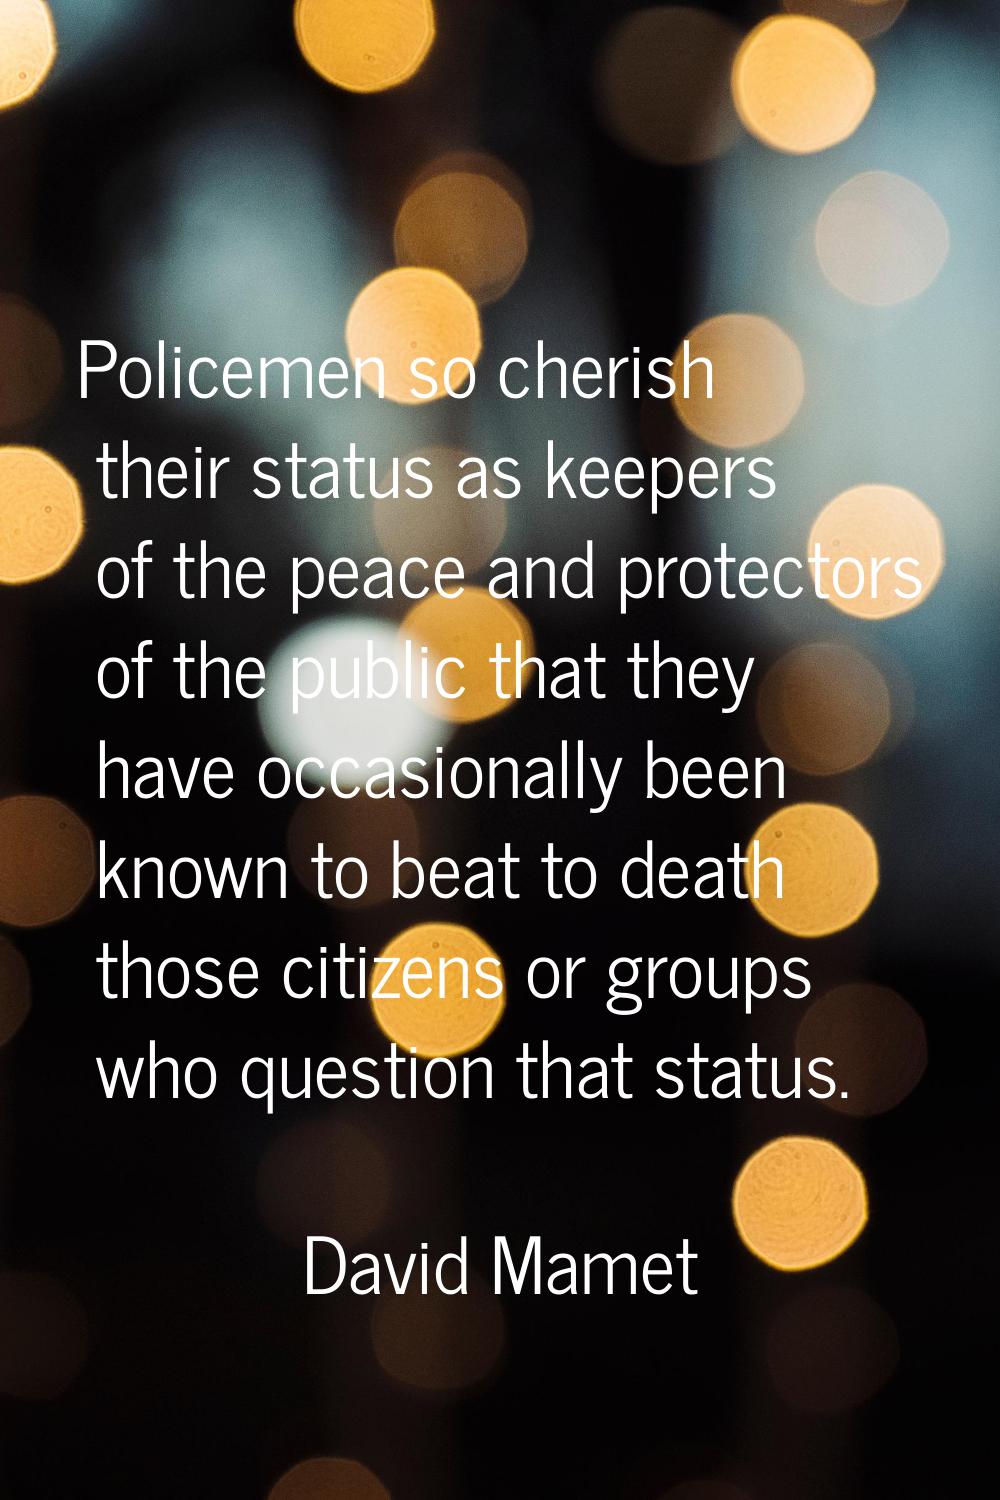 Policemen so cherish their status as keepers of the peace and protectors of the public that they ha